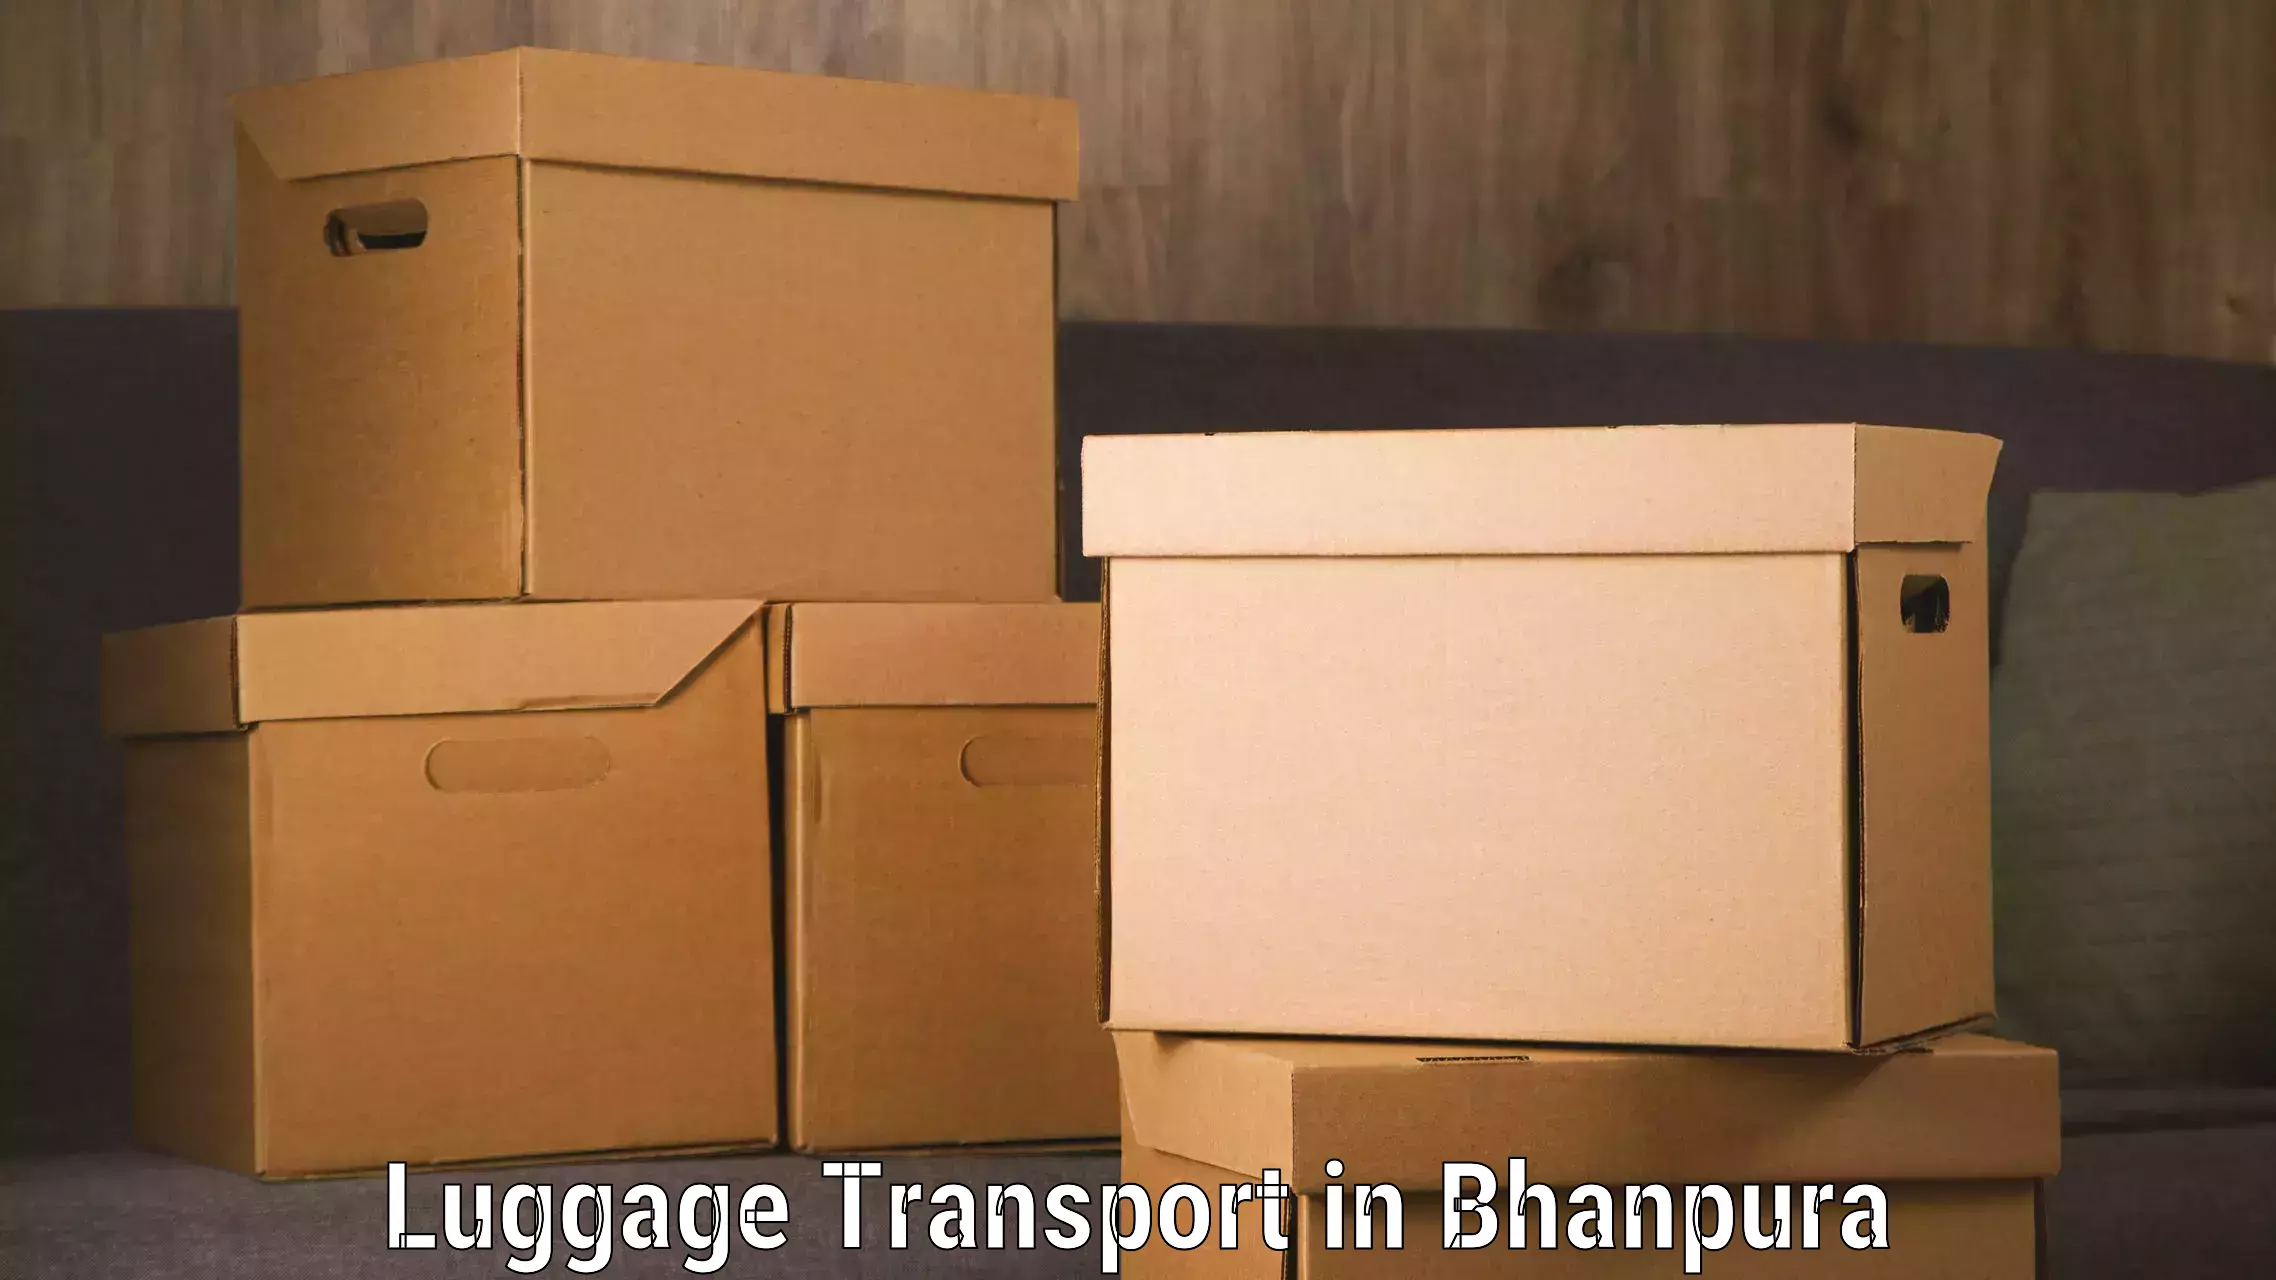 Baggage relocation service in Bhanpura